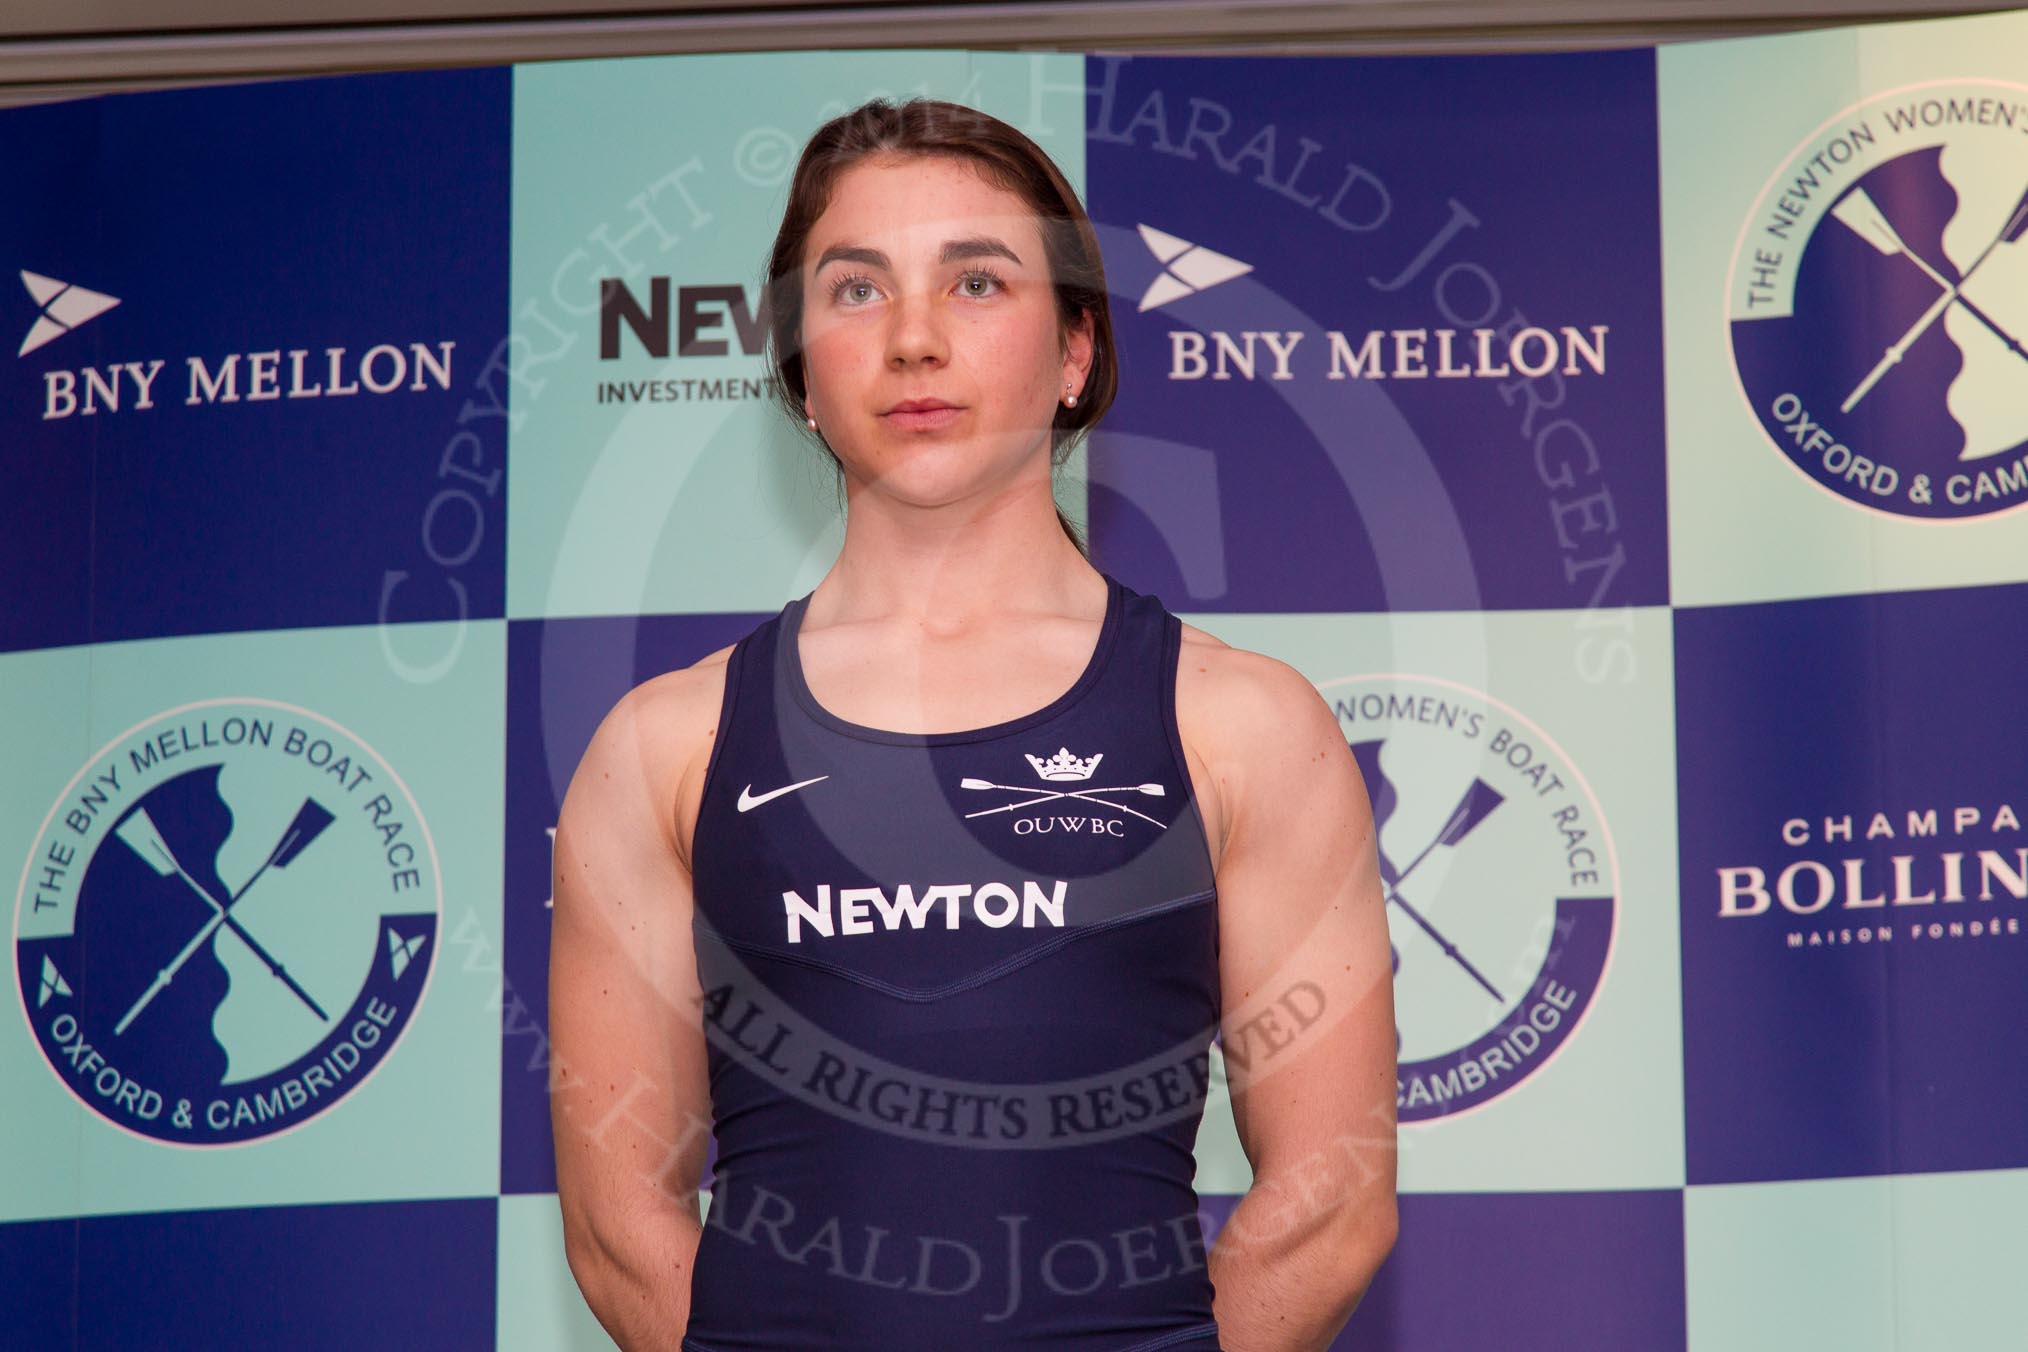 The Boat Race season 2014 - Crew Announcement and Weigh In: The 2014 Women's Boat Race crews: Oxford bow Elizabeth Fenje - 58.6kg..
BNY Mellon Centre,
London EC4V 4LA,
London,
United Kingdom,
on 10 March 2014 at 11:44, image #14